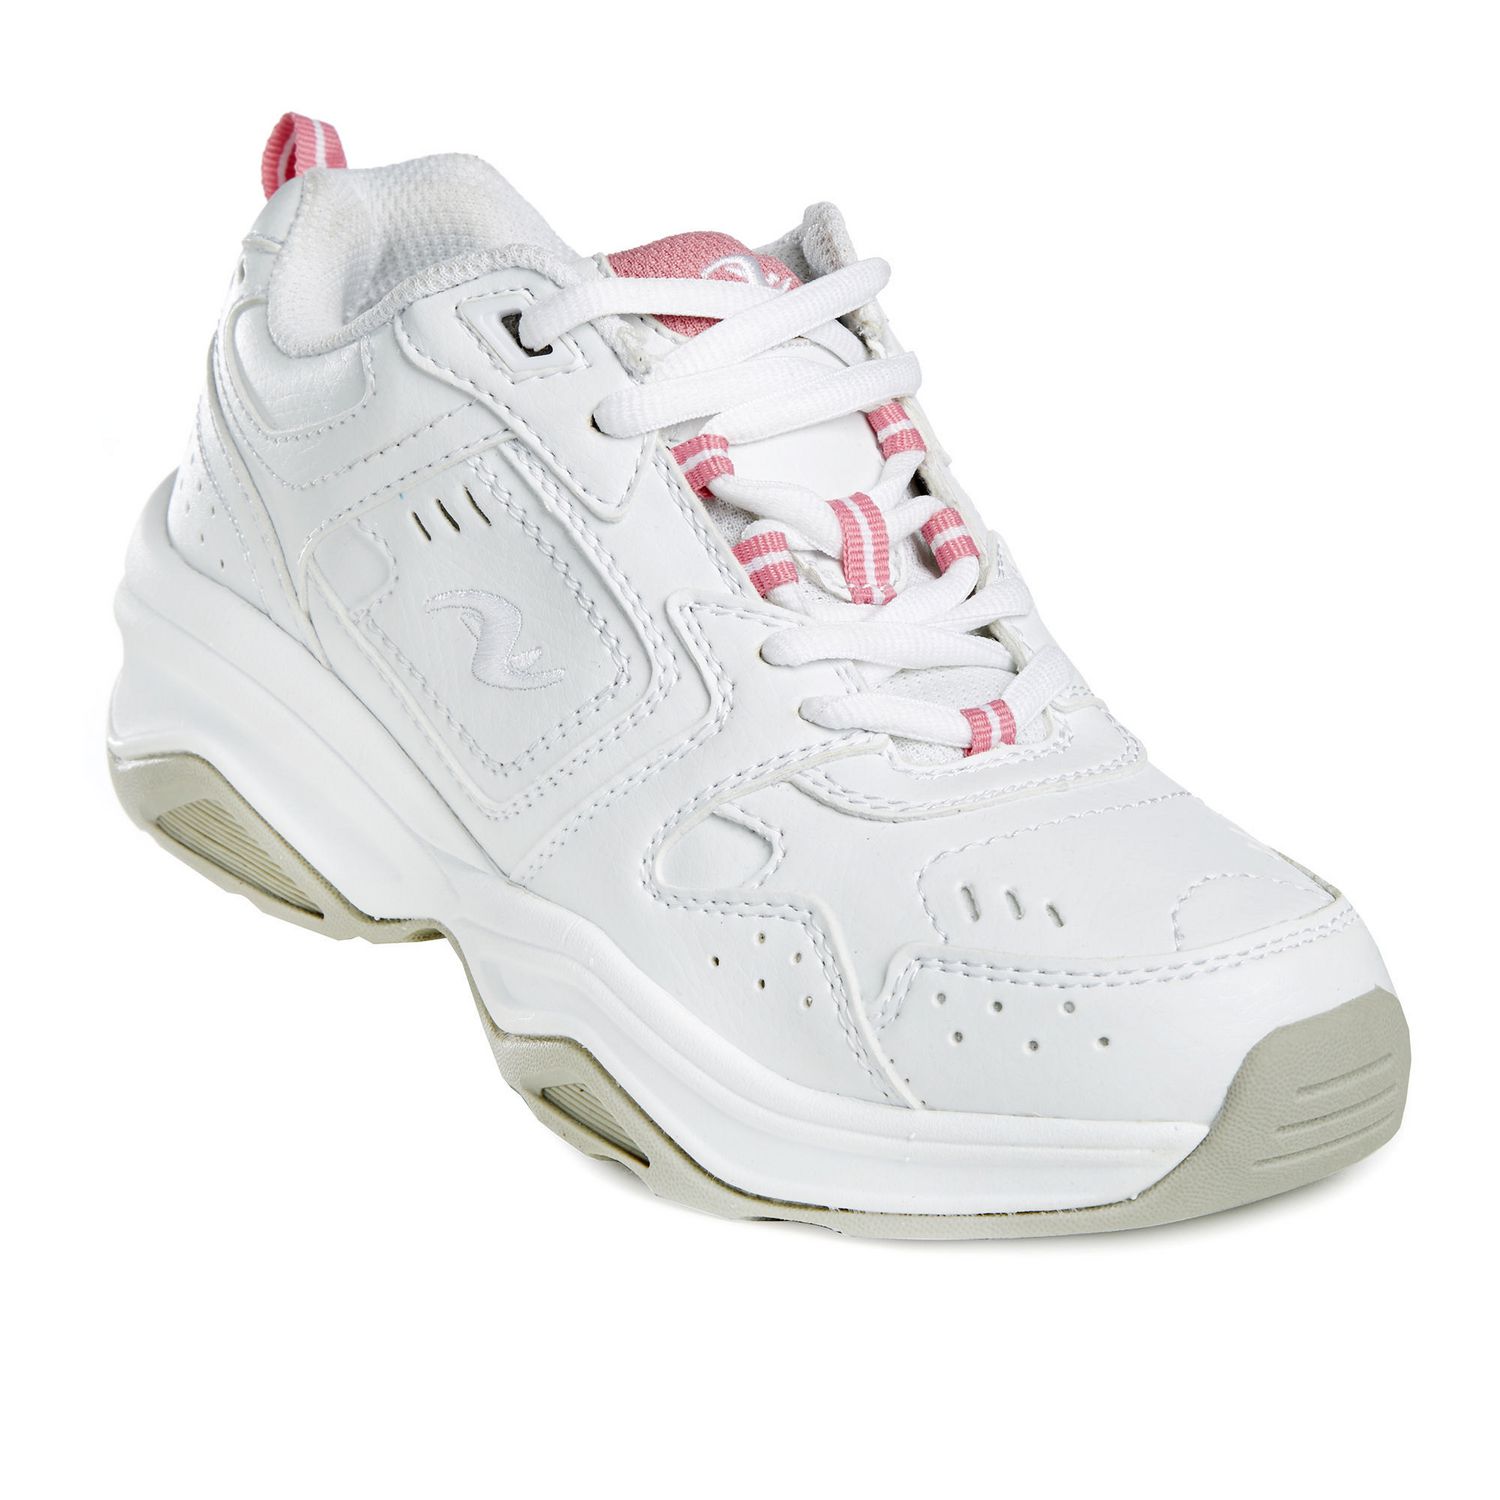 Athletic Works Women’s Thelma Athletic Shoe | Walmart Canada